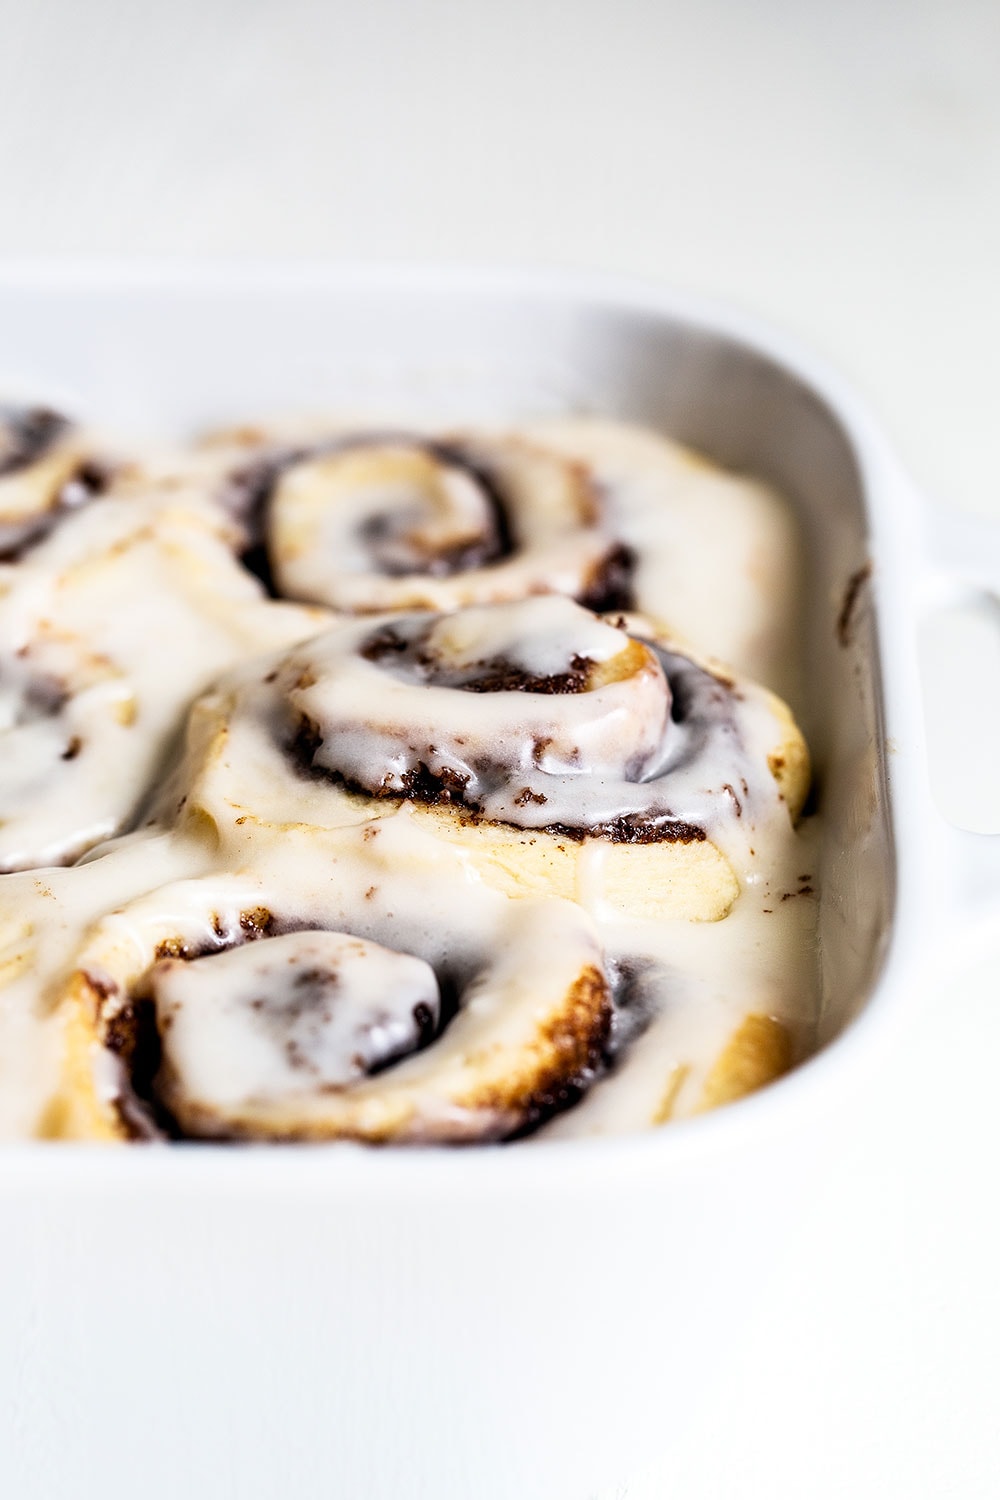 Cinnamon rolls in a baking dish with icing on top. Delicious Easter brunch option!